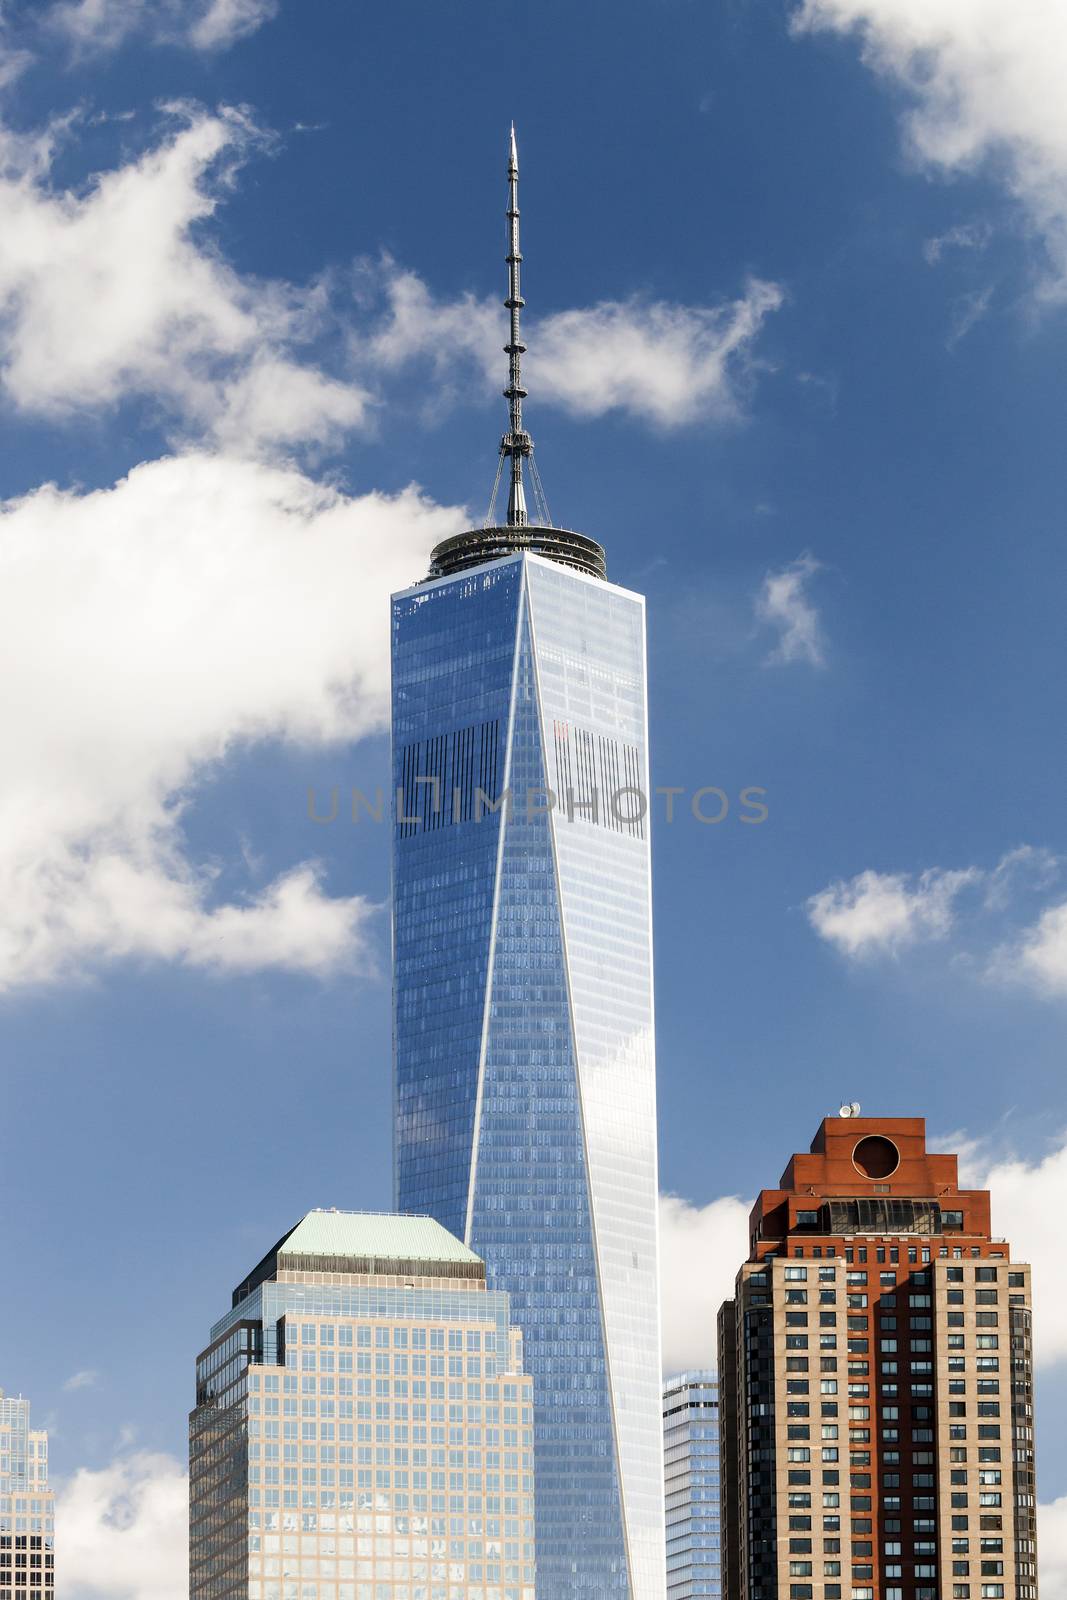 NEW YORK - OCTOBER 8: Freedom Tower in Lower Manhattan on October 8, 2014. One World Trade Center is the tallest building in the Western Hemisphere and the third-tallest building in the world